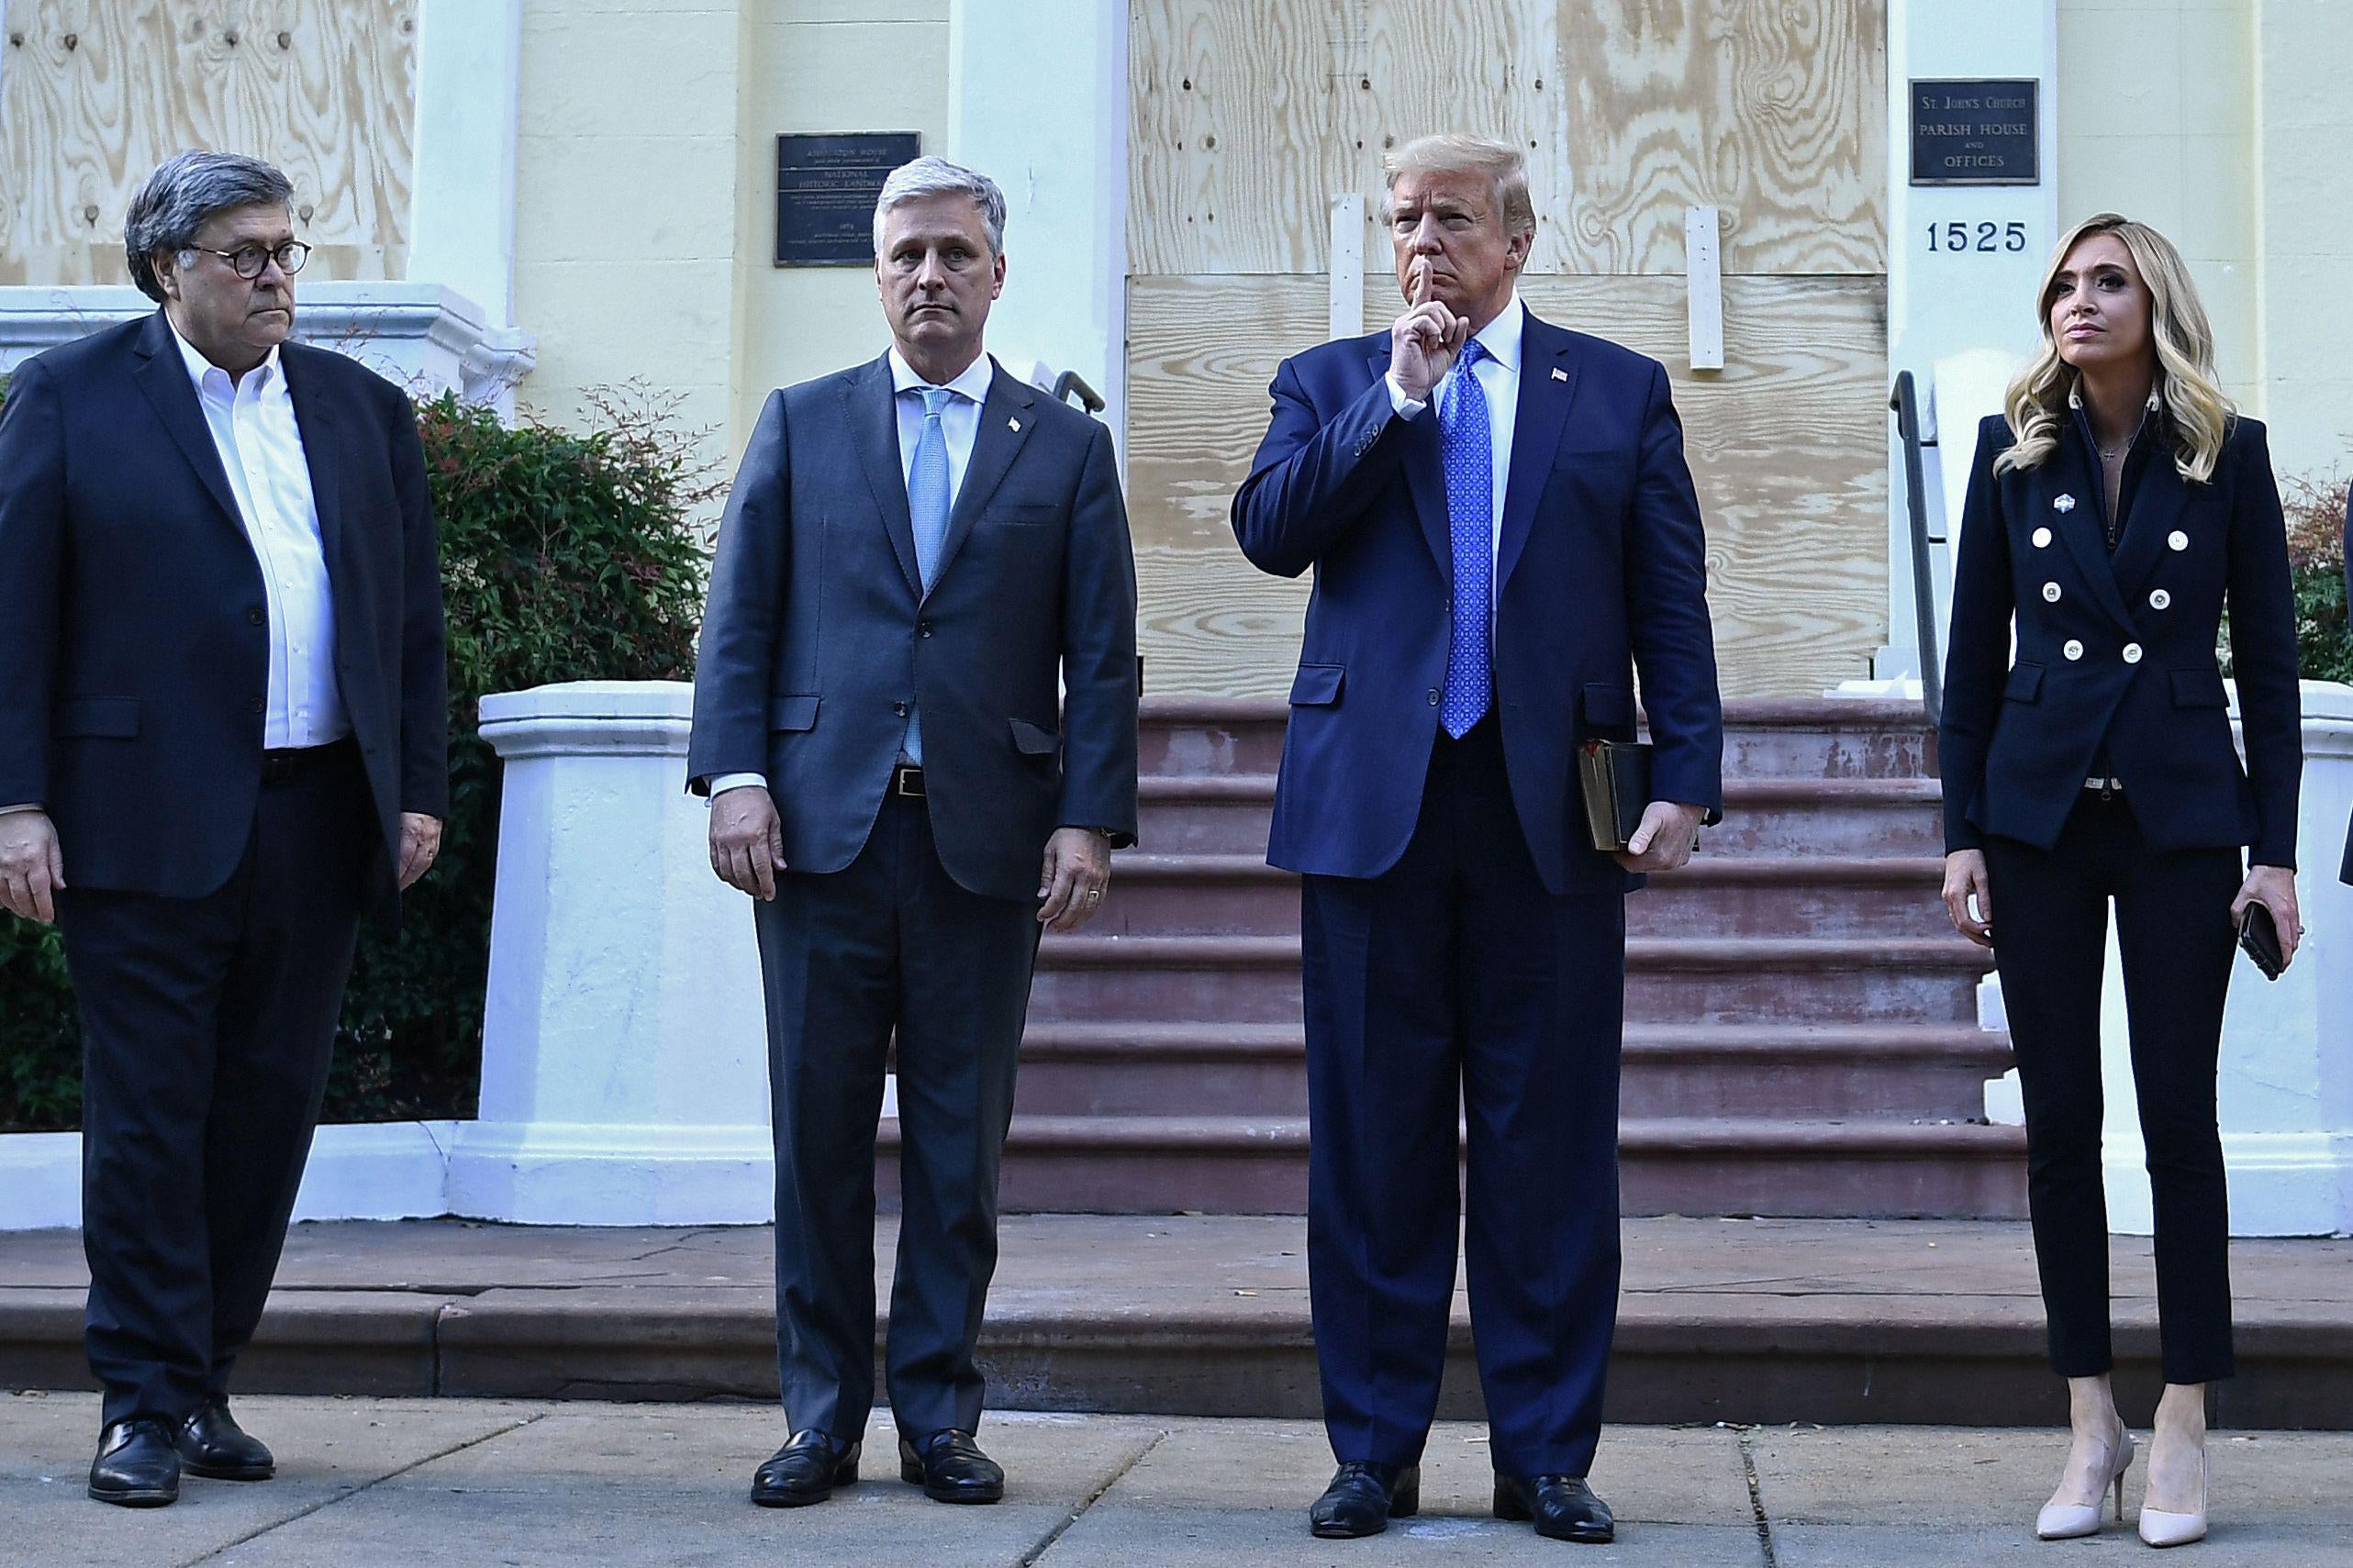 President Donald Trump holds up a Bible as he gestures alongside William Barr, Robert O'Brien, and Kayleigh McEnany outside of St John's Episcopal Church.